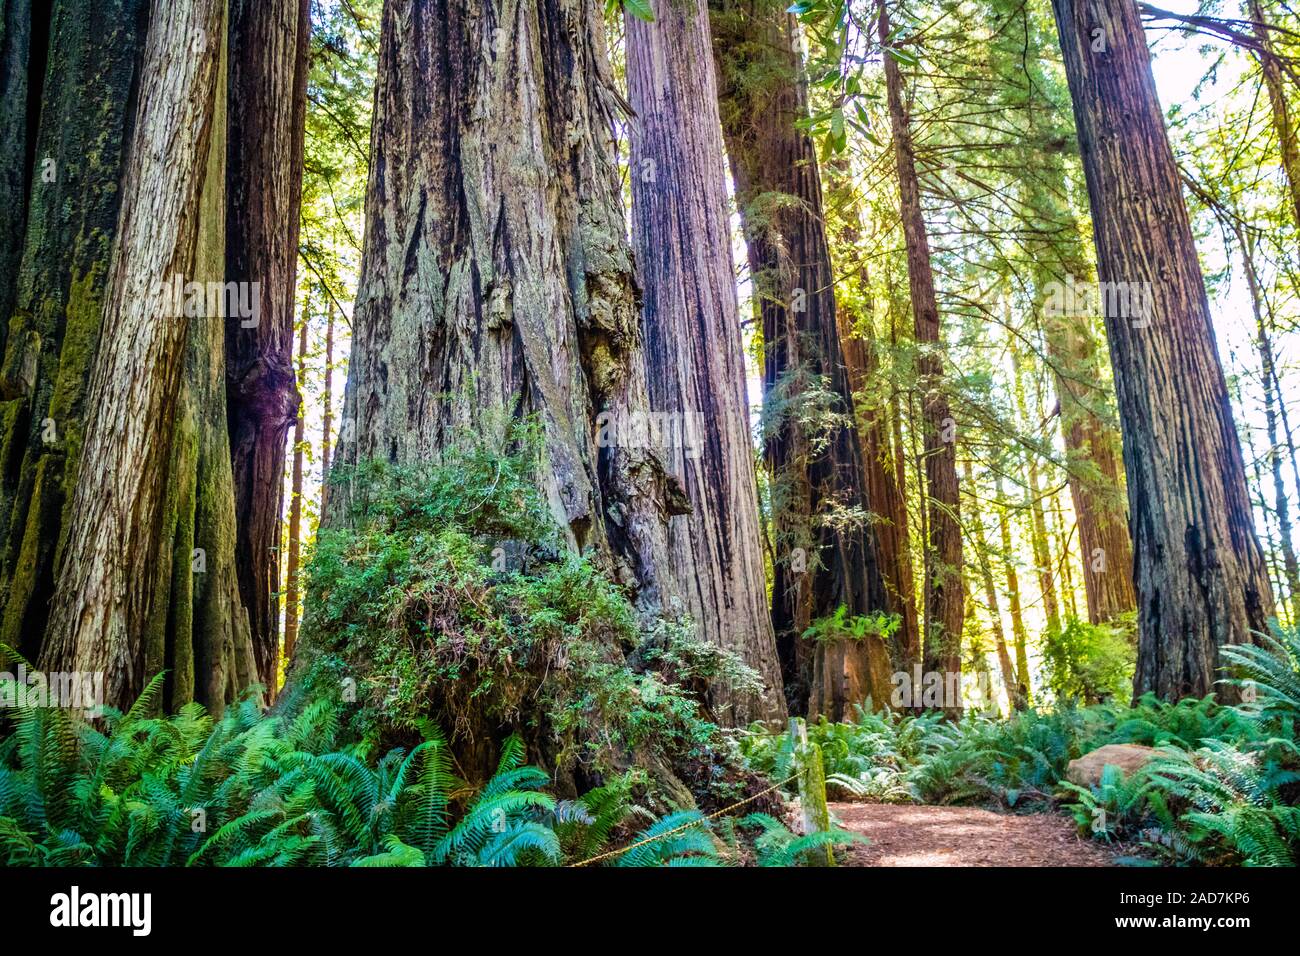 Giant Sequoia Tree in Redwoods National & State Parks - California Stock Photo